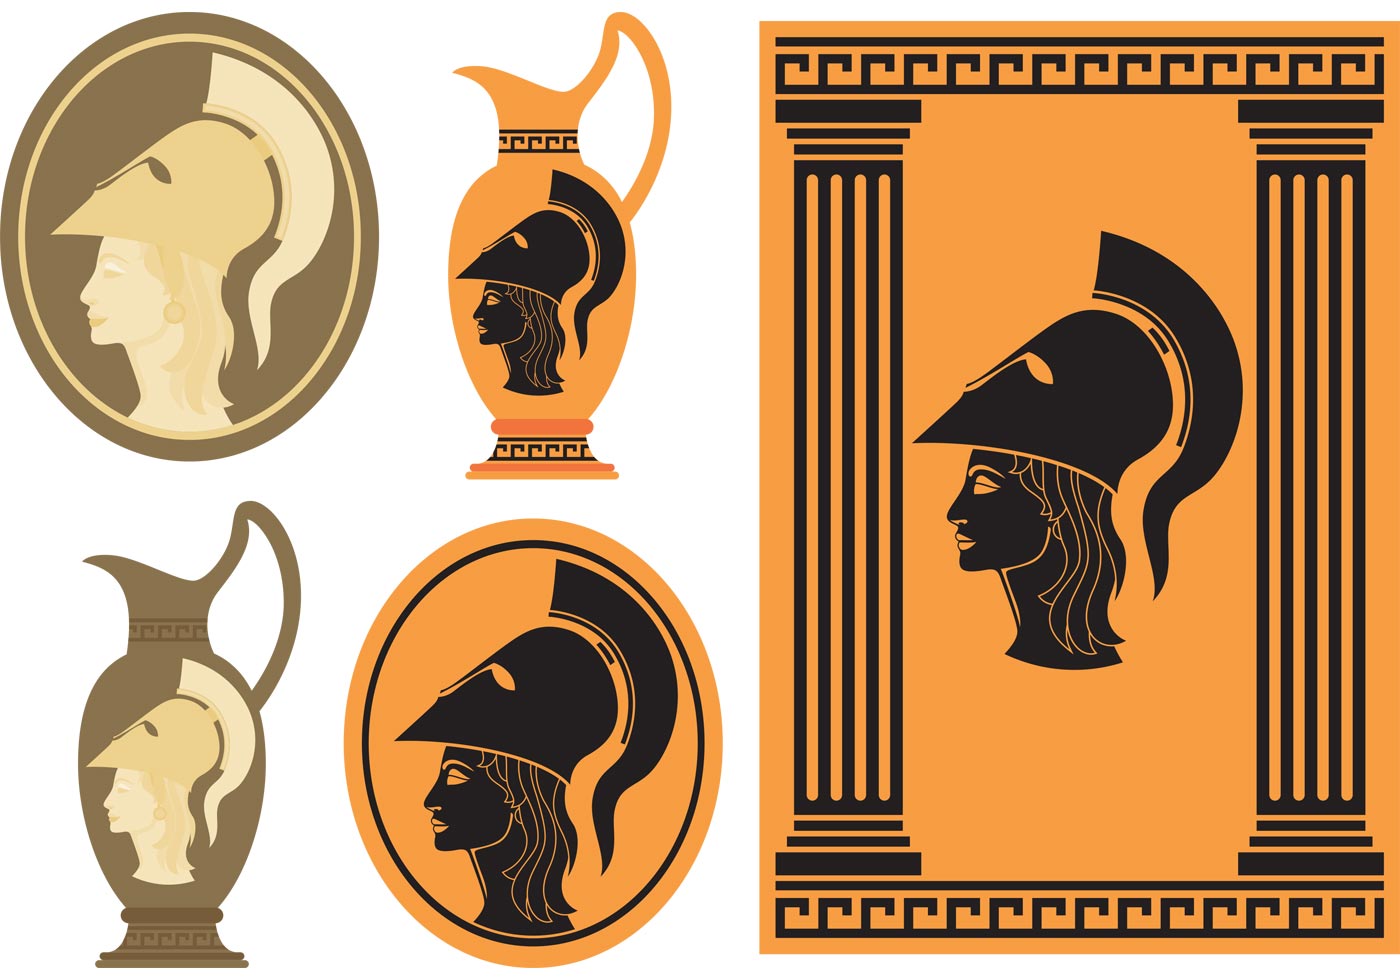 Athena Symbols - The Role of Athena in Ancient Greek Art